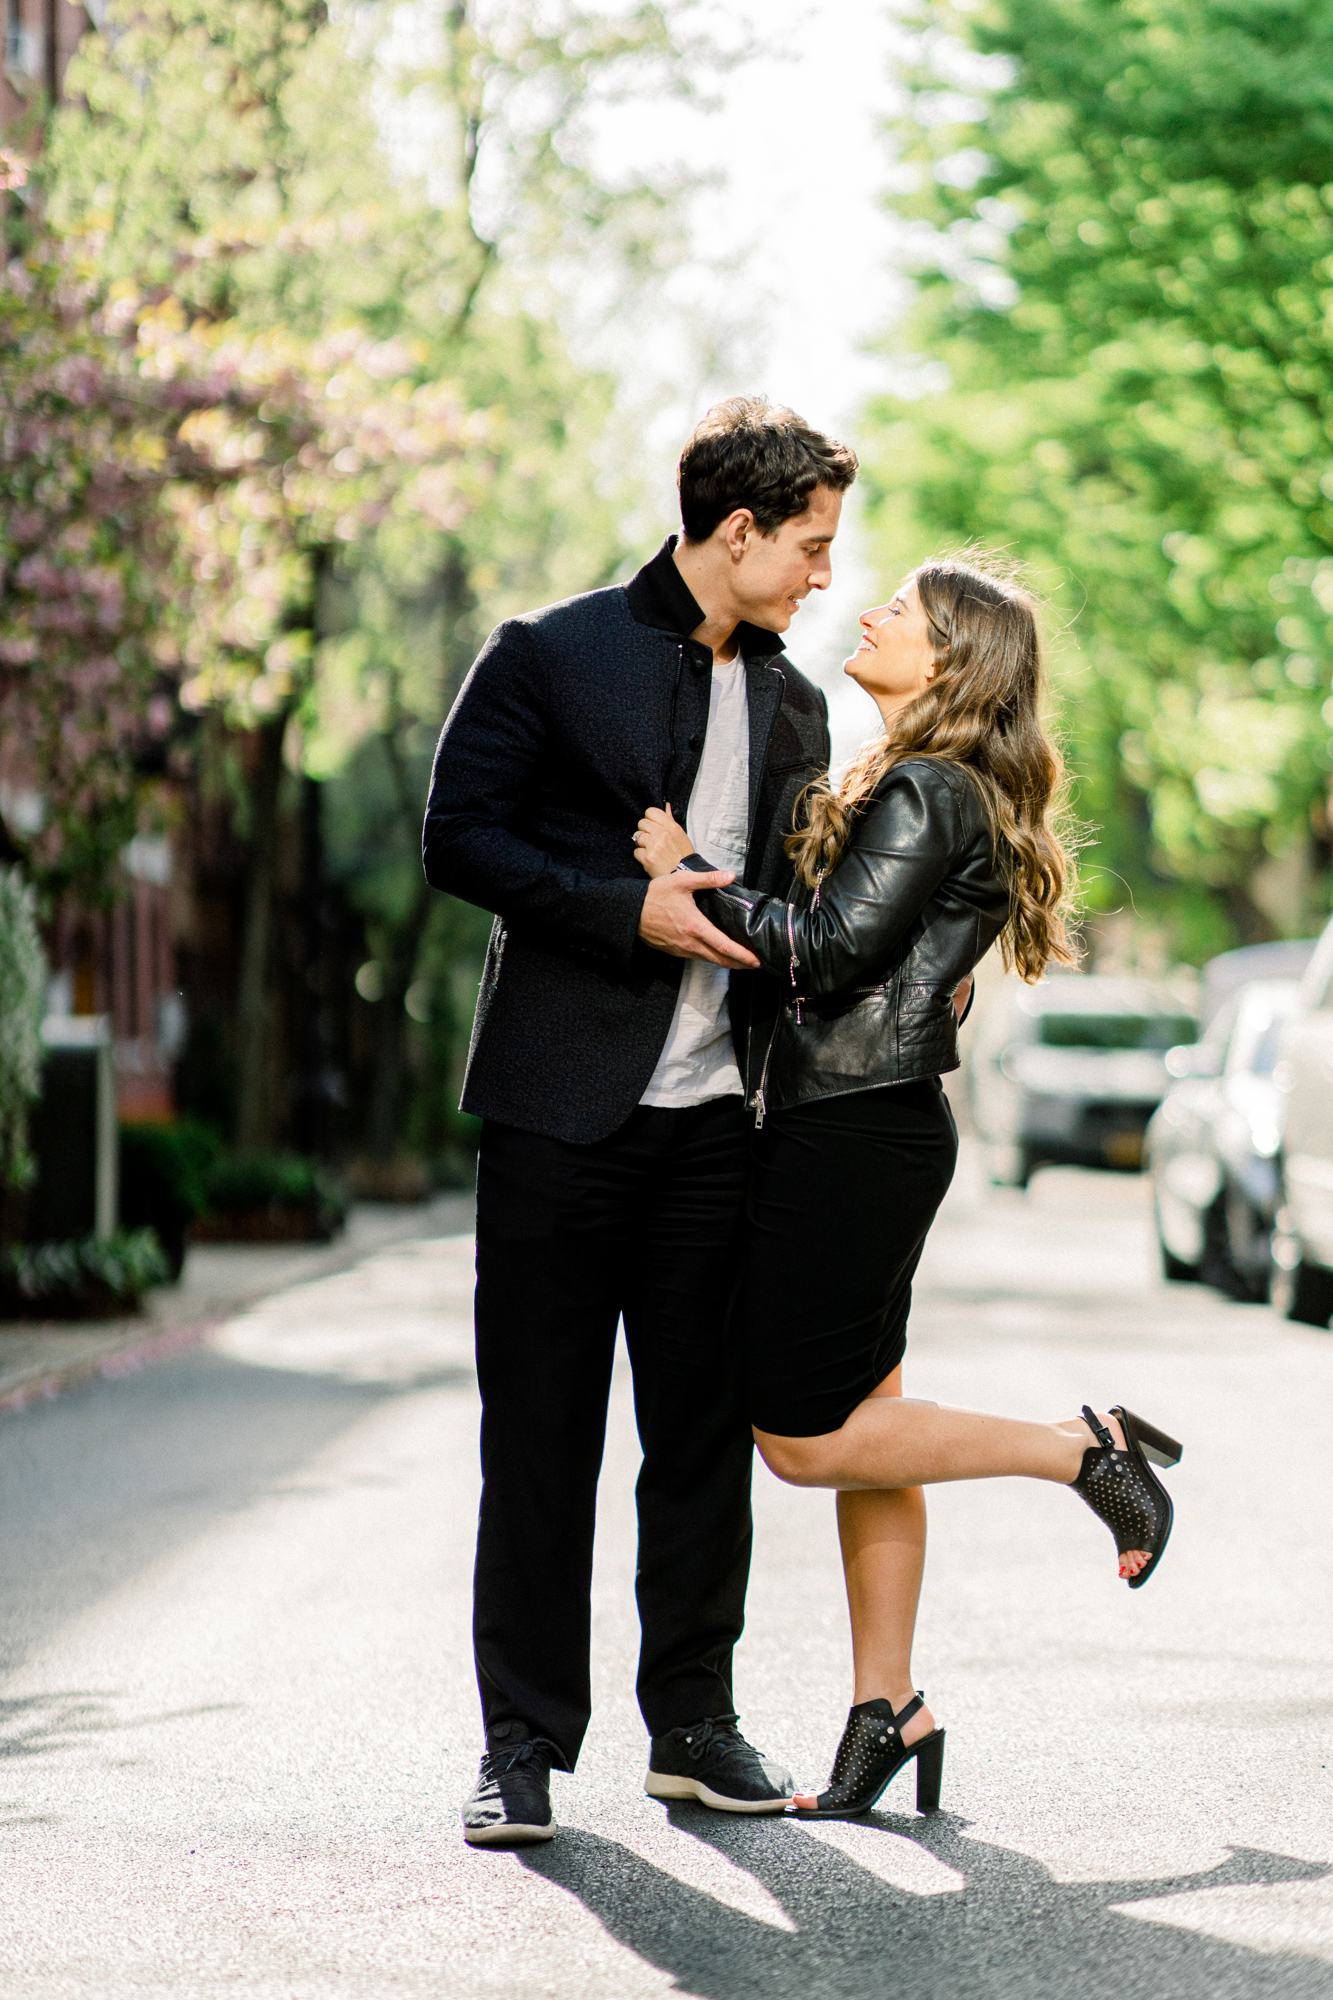 Stunning West Village Engagement Photos with Spring Blossoms